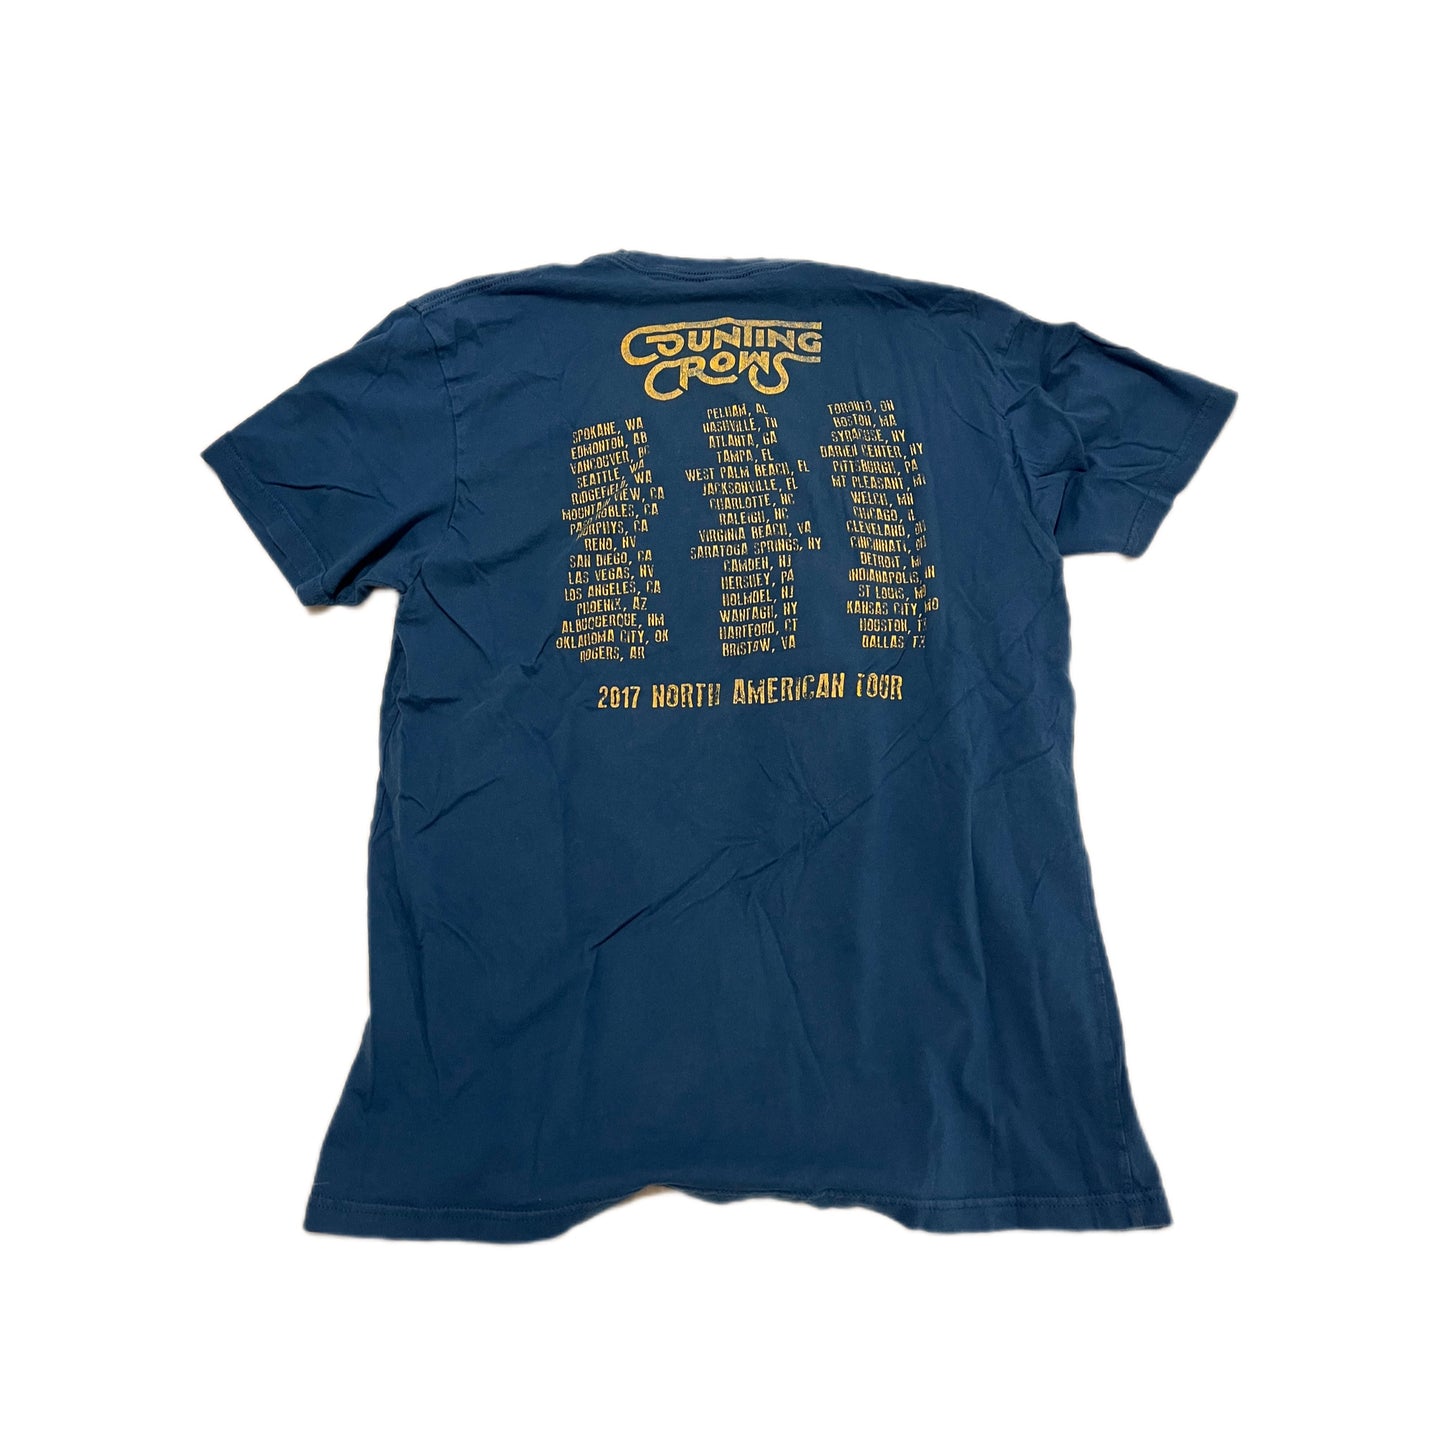 Counting Crows 2017 Tour Vintage Tee